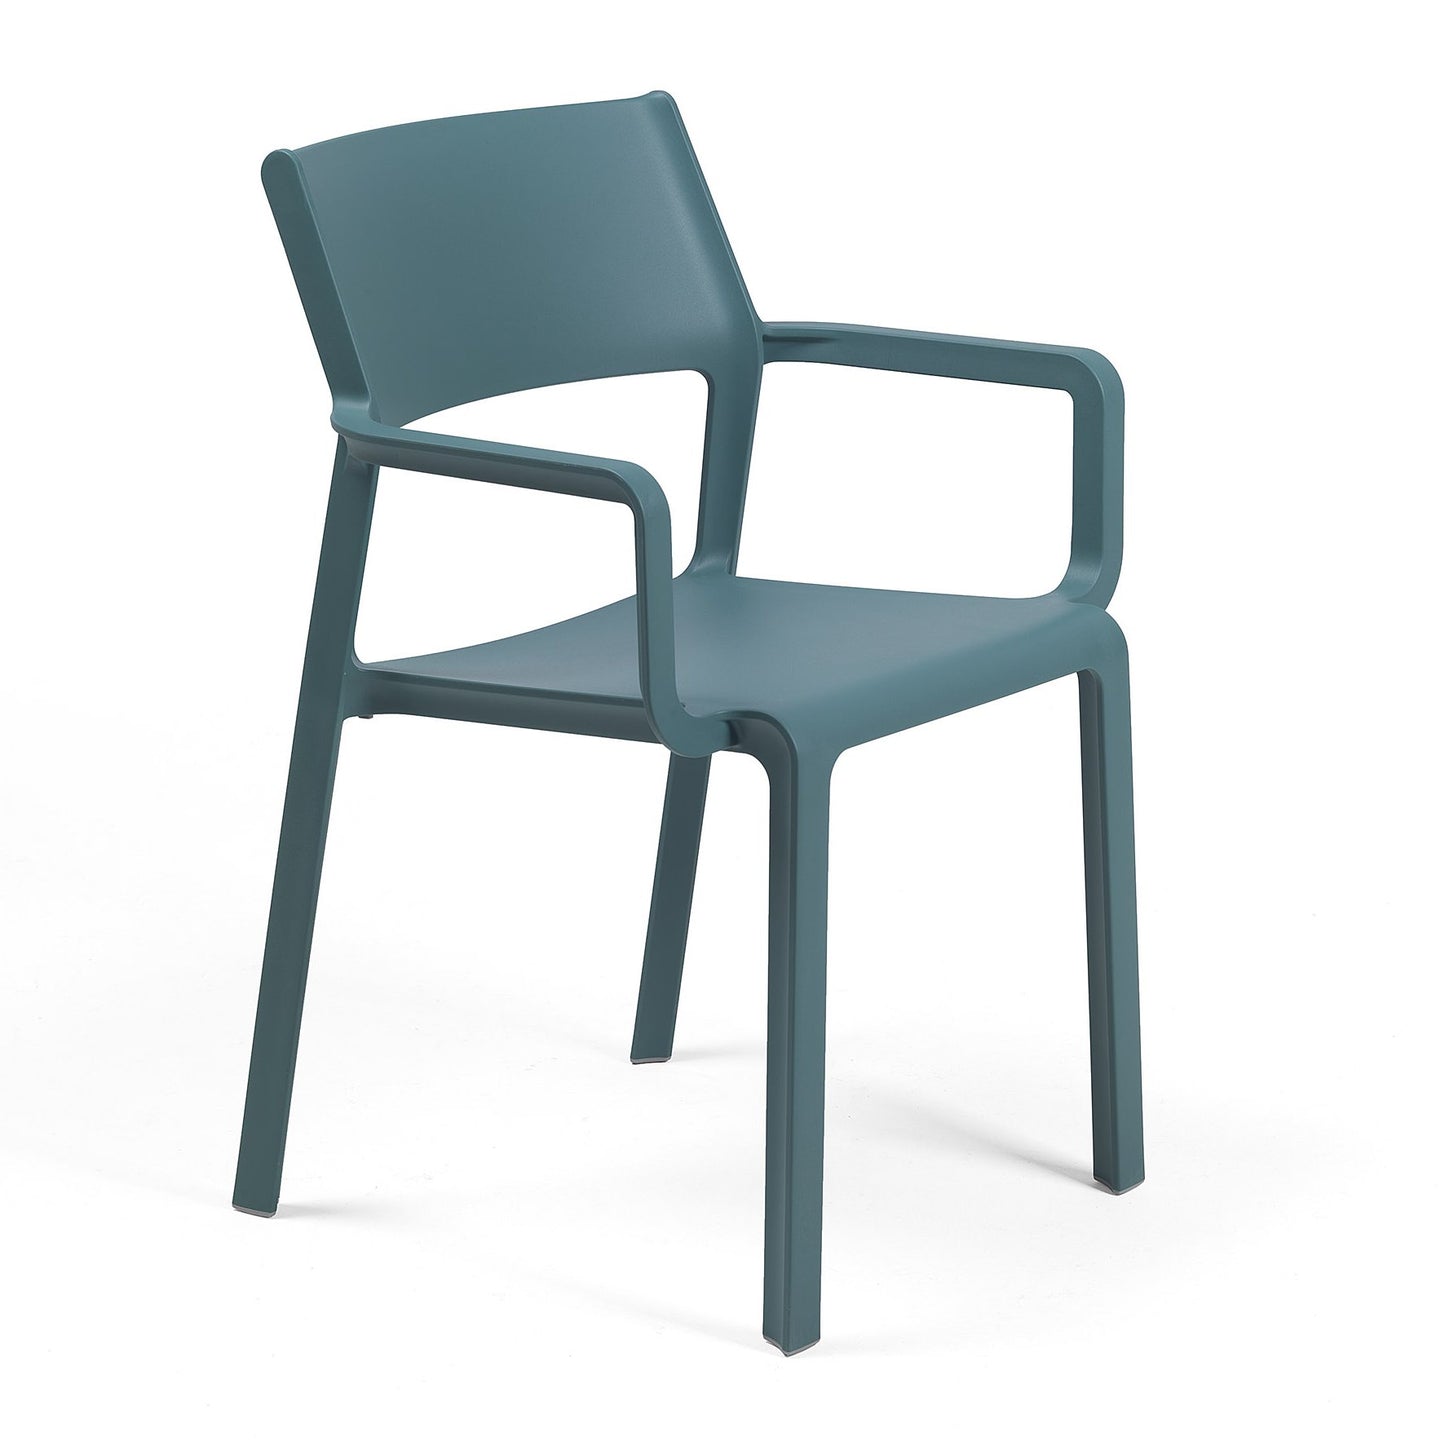 Nardi Trill Outdoor Armchair in Teal